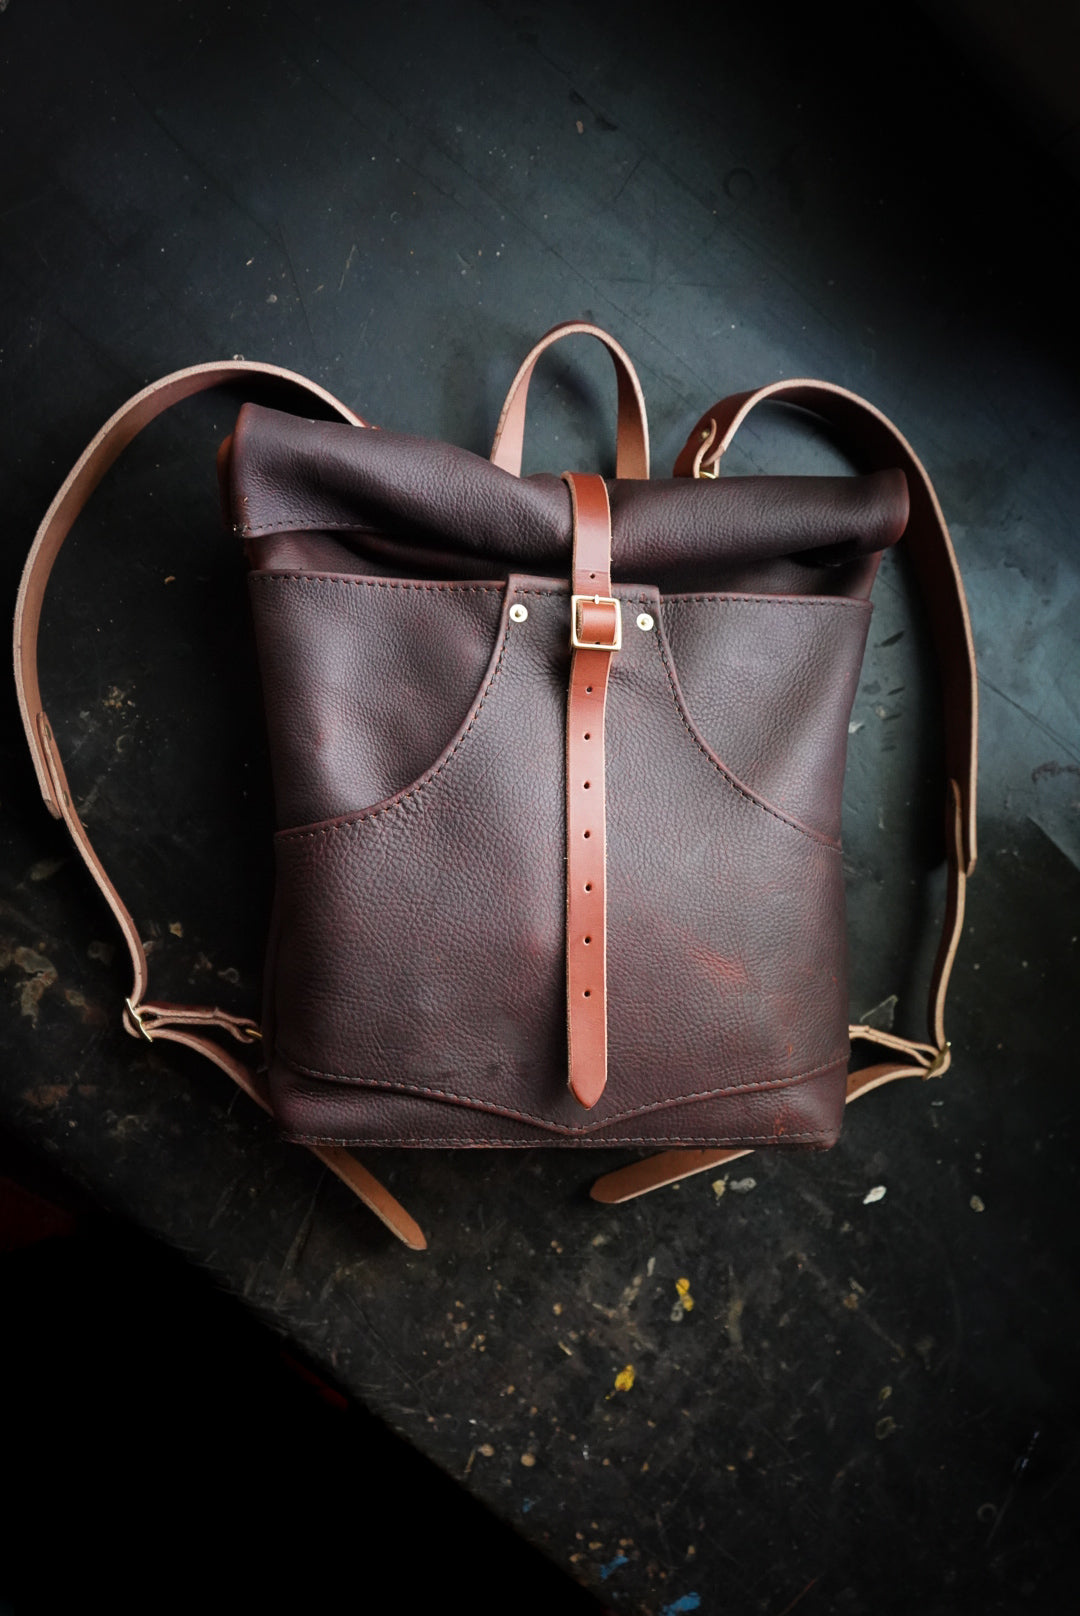 Vinland Pack - Leather Rolltop Backpack - Handmade In Canada ...